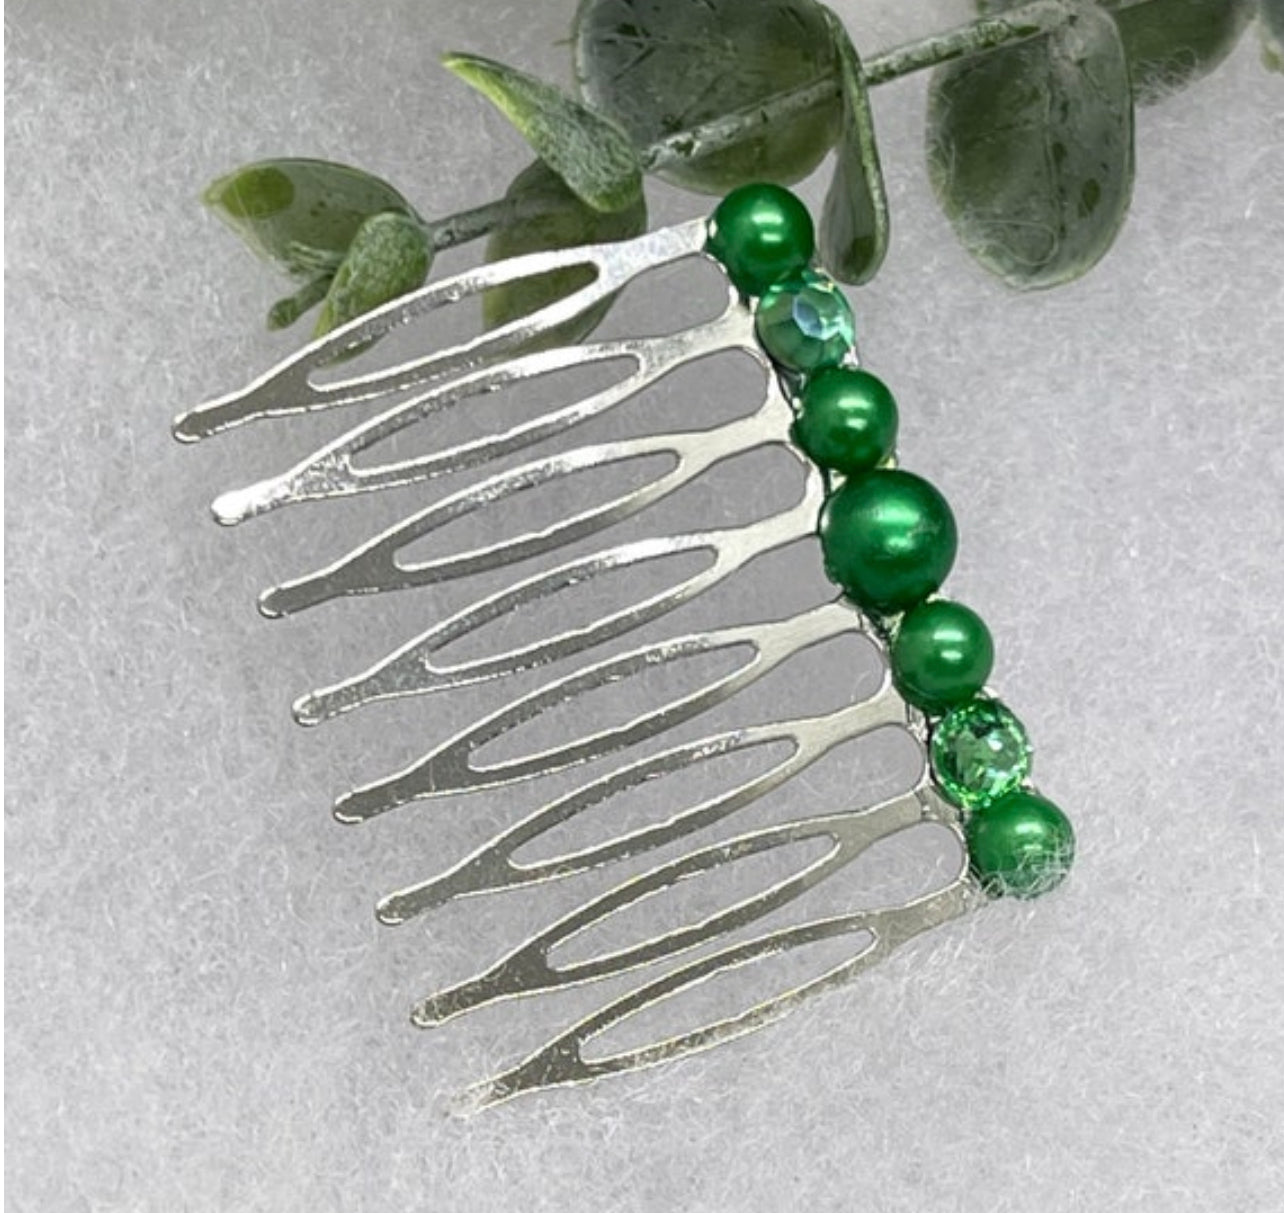 Emerald Green  faux Pearl crystal side comb approximately 2.0”long metal hair accessory bridal wedding Retro